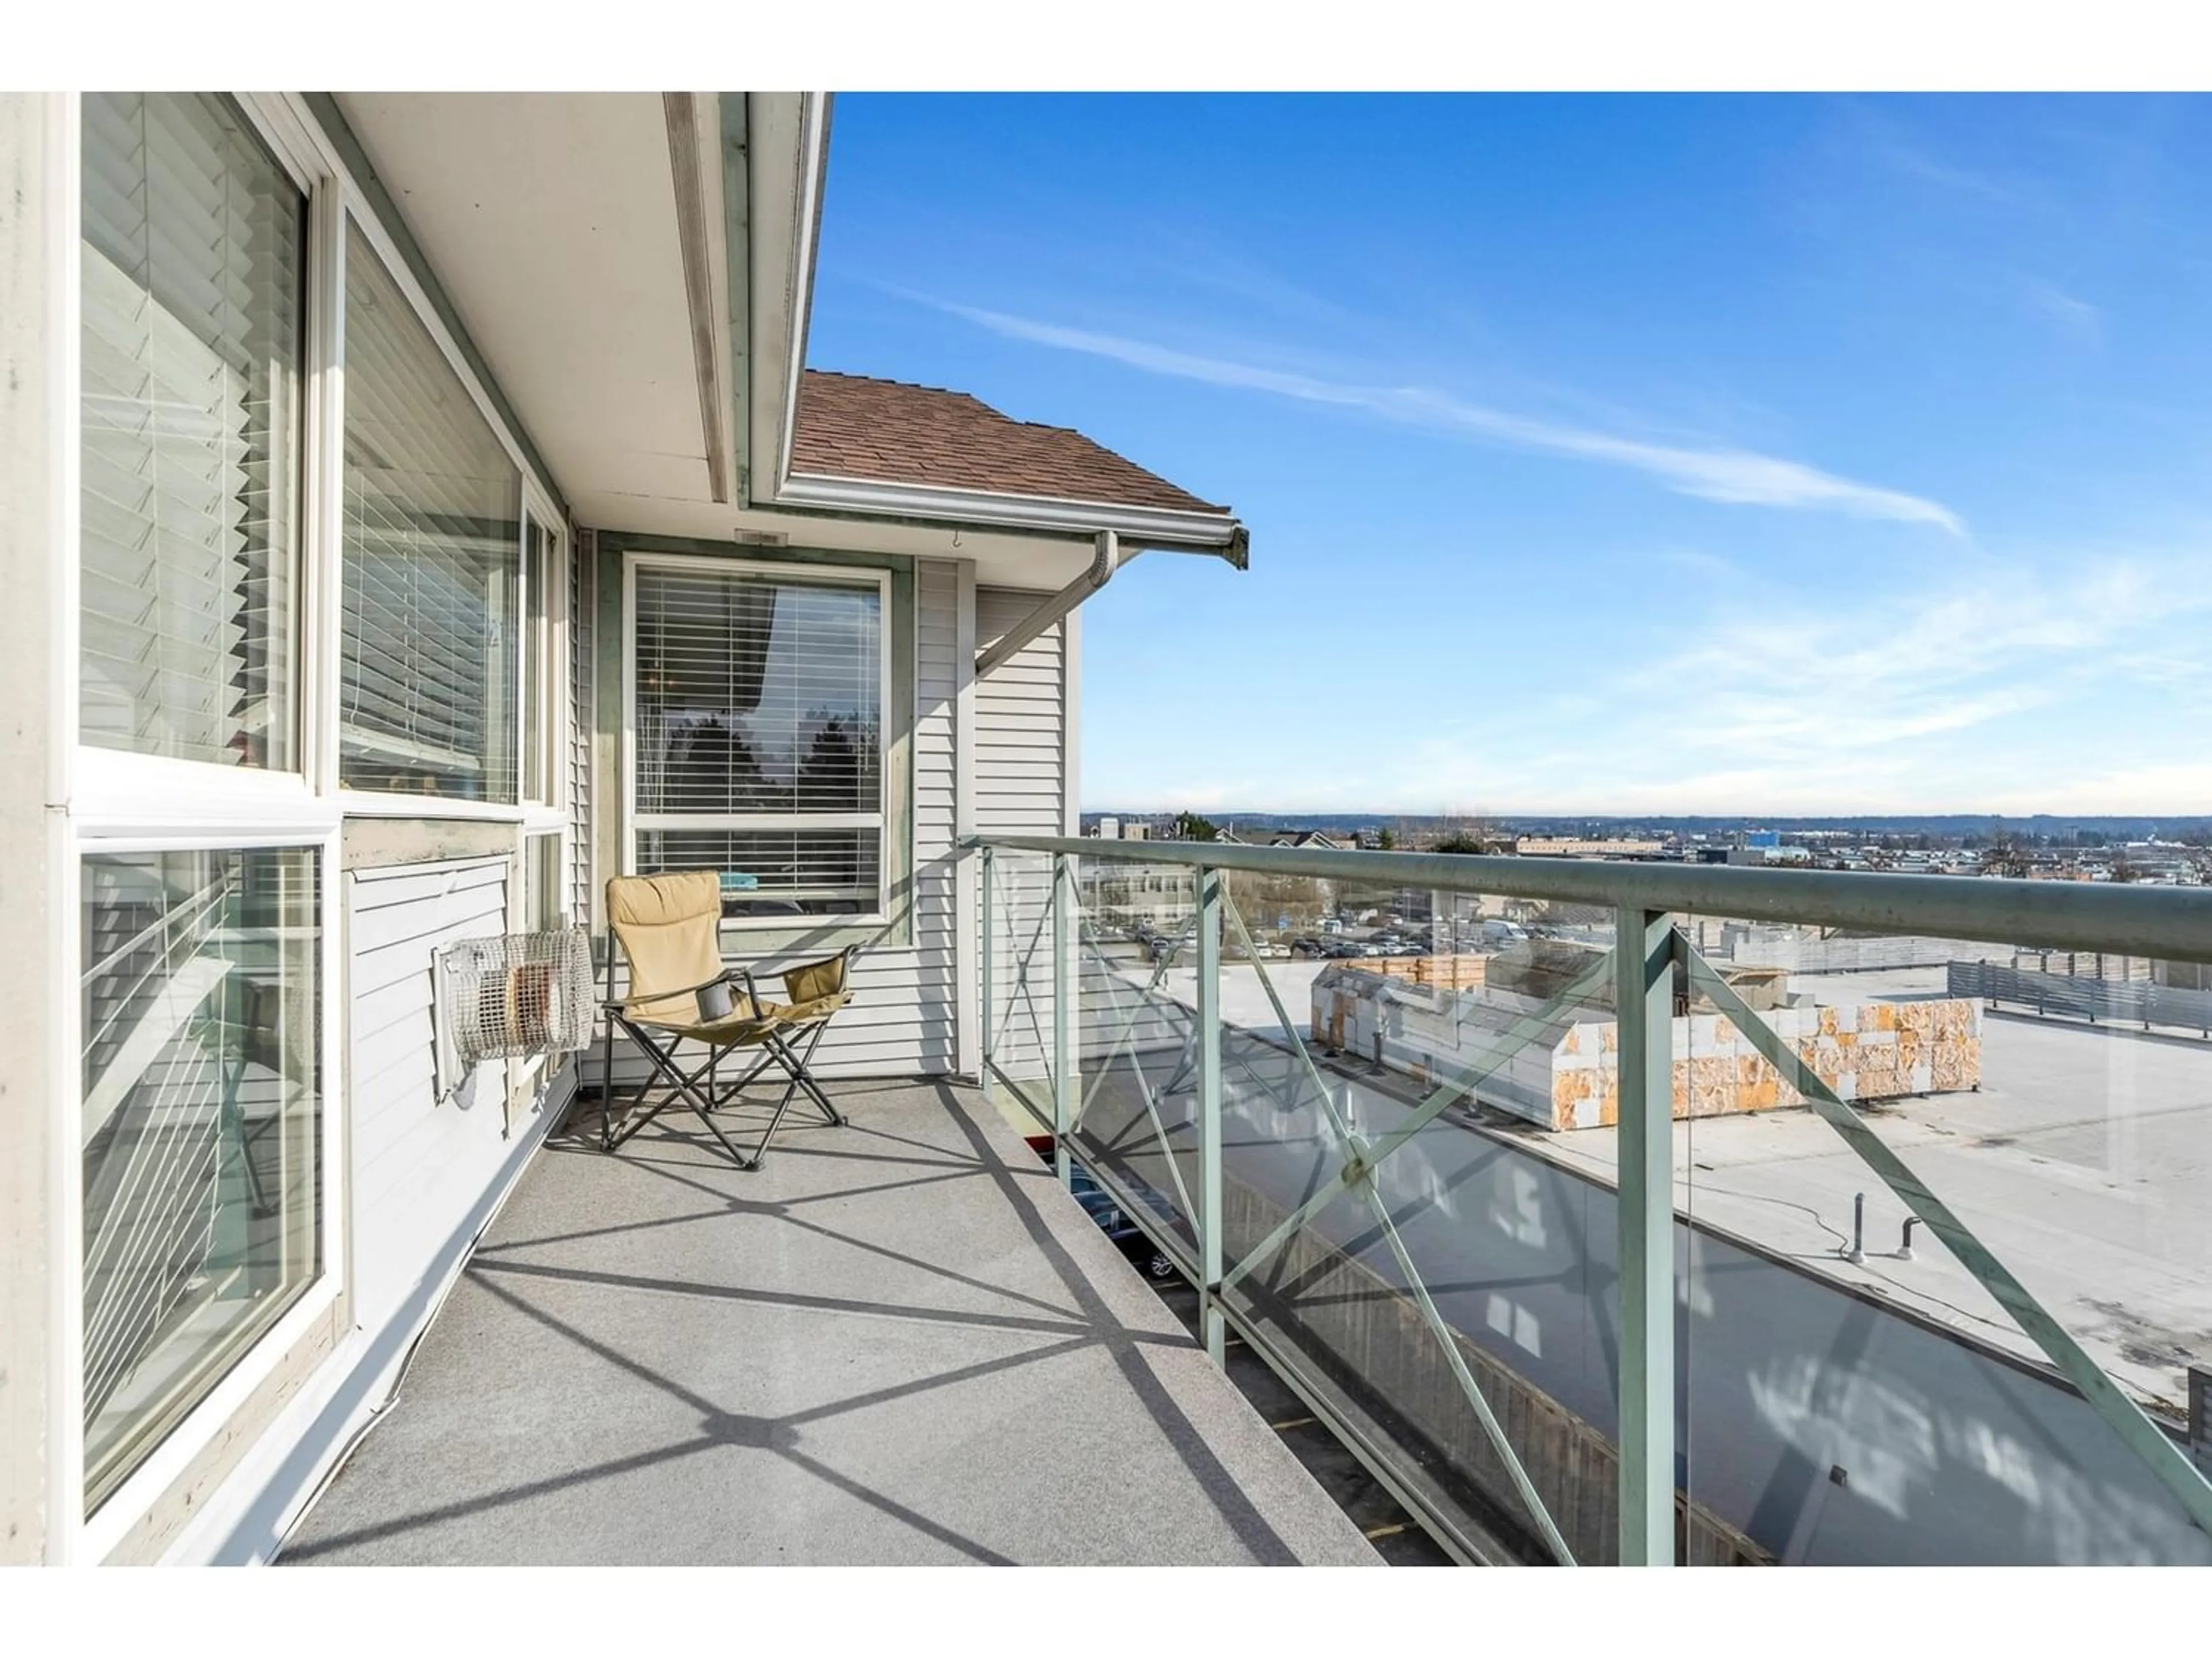 Balcony in the apartment for 406 6390 196 STREET, Langley British Columbia V2Y1J2